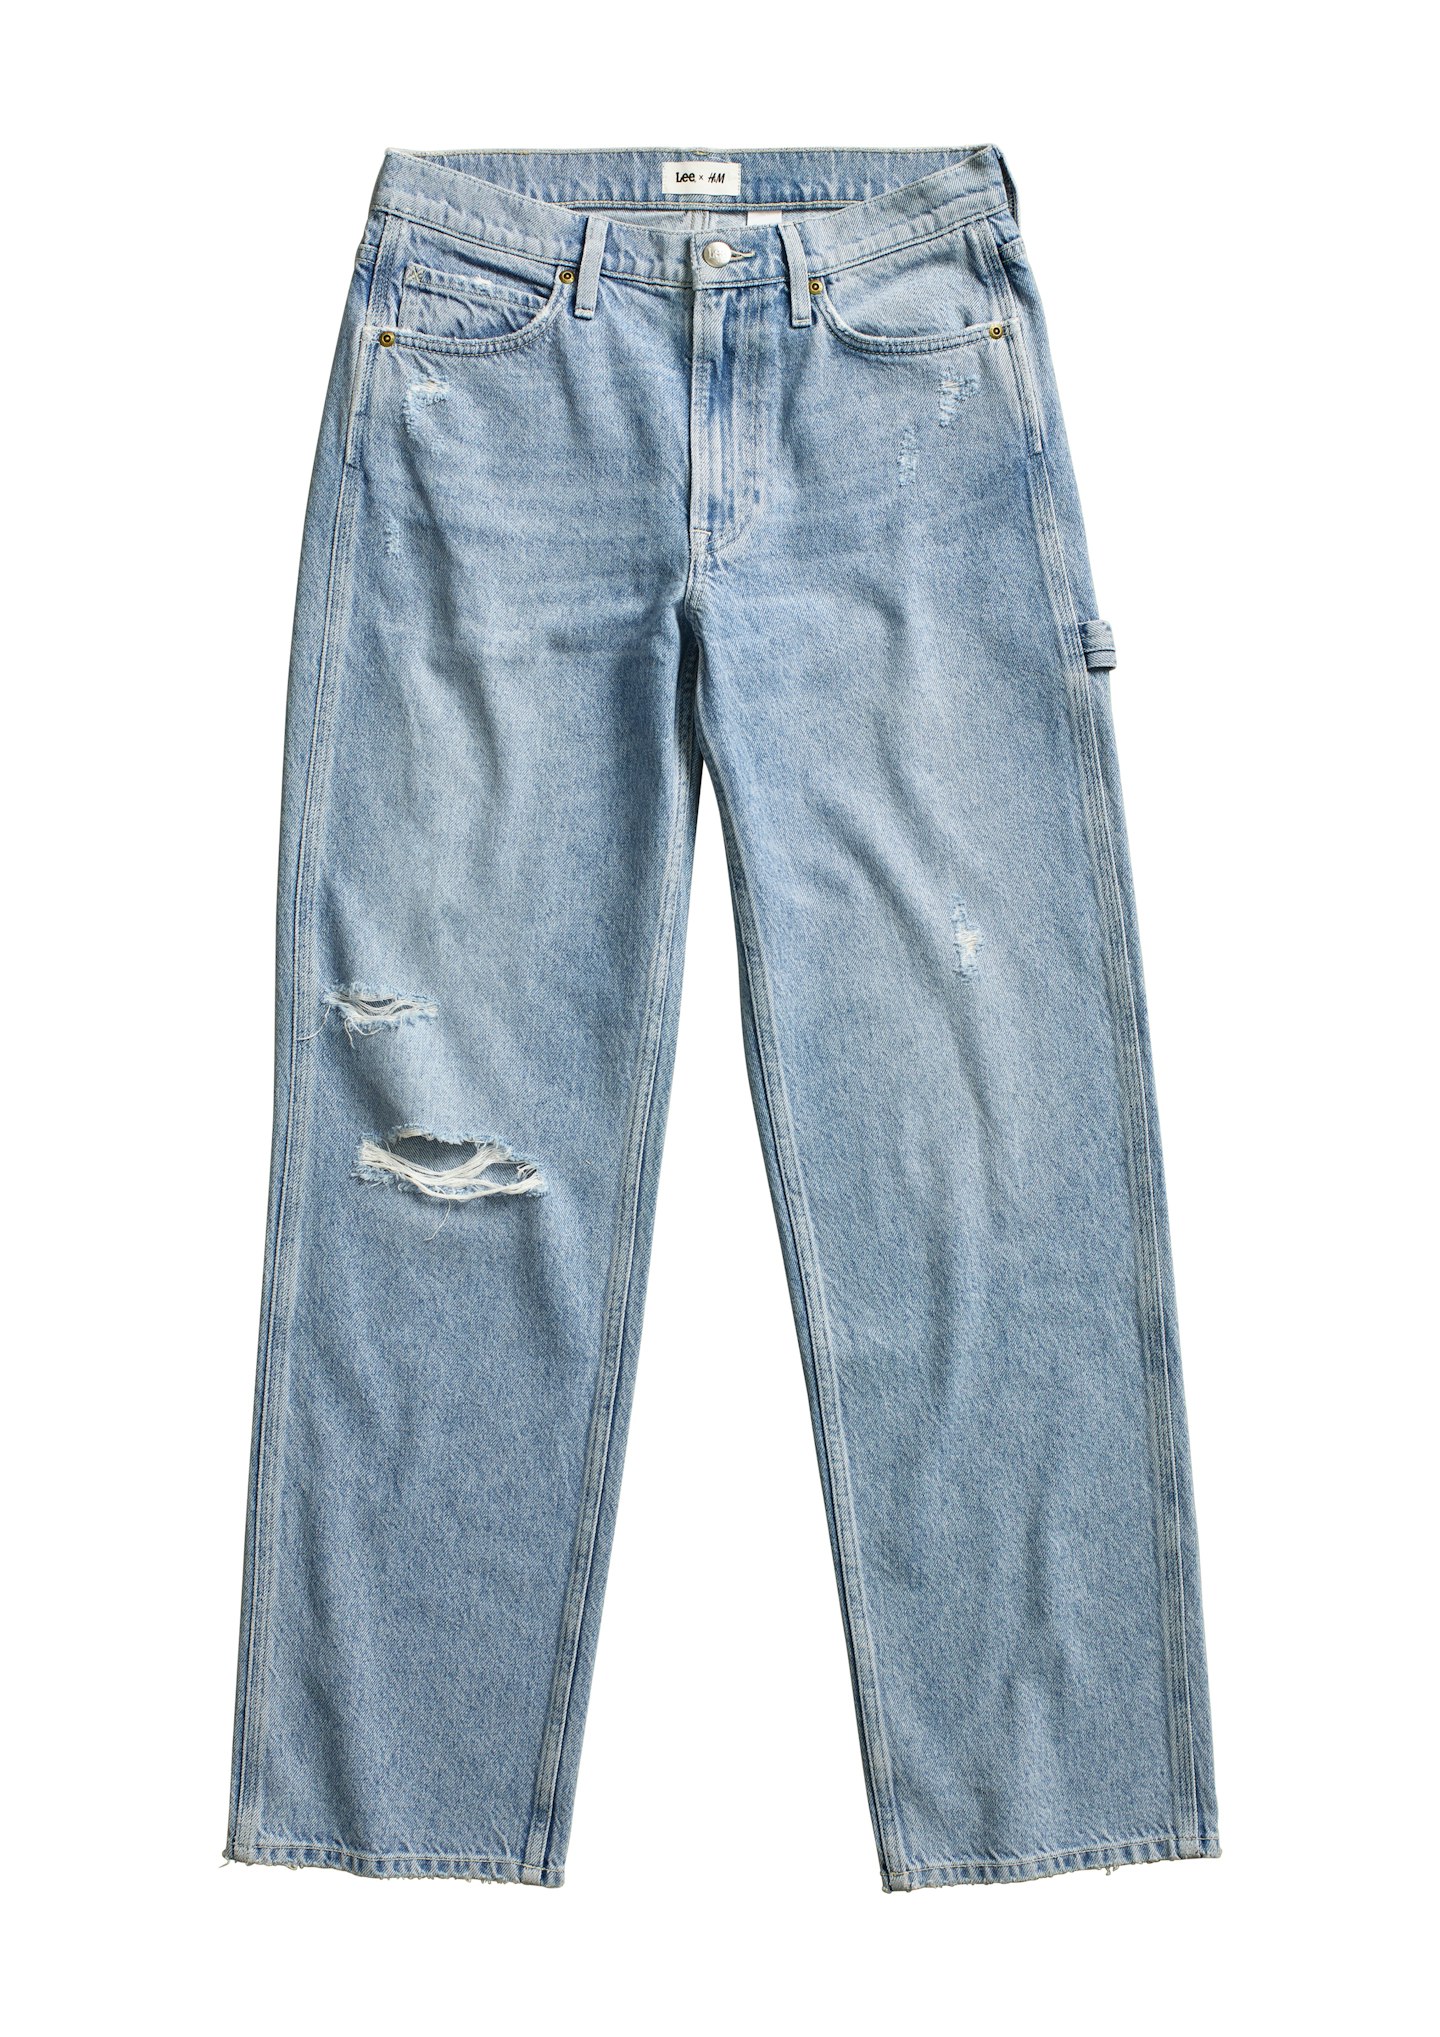 Lee X H&M, Slouch Straight High Jeans, £39.99